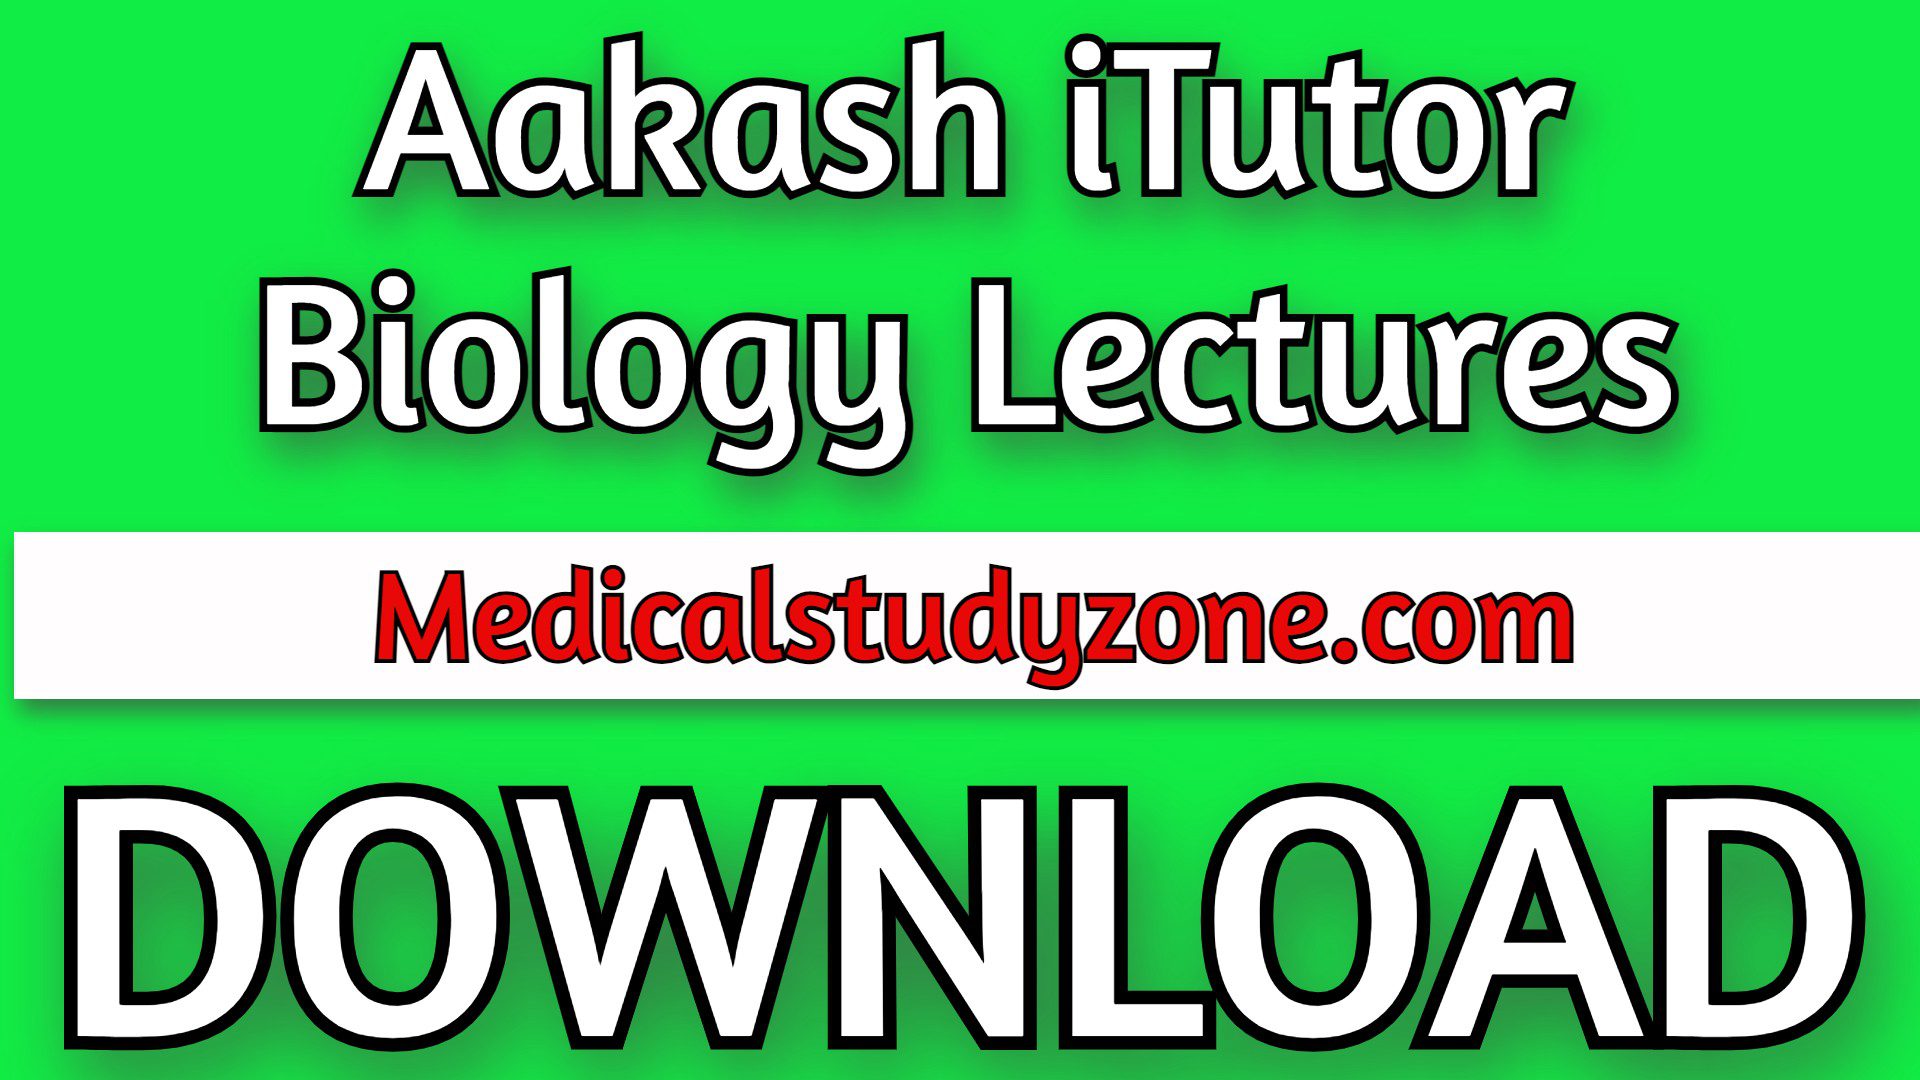 Aakash iTutor Biology Lectures 2021 Free Download